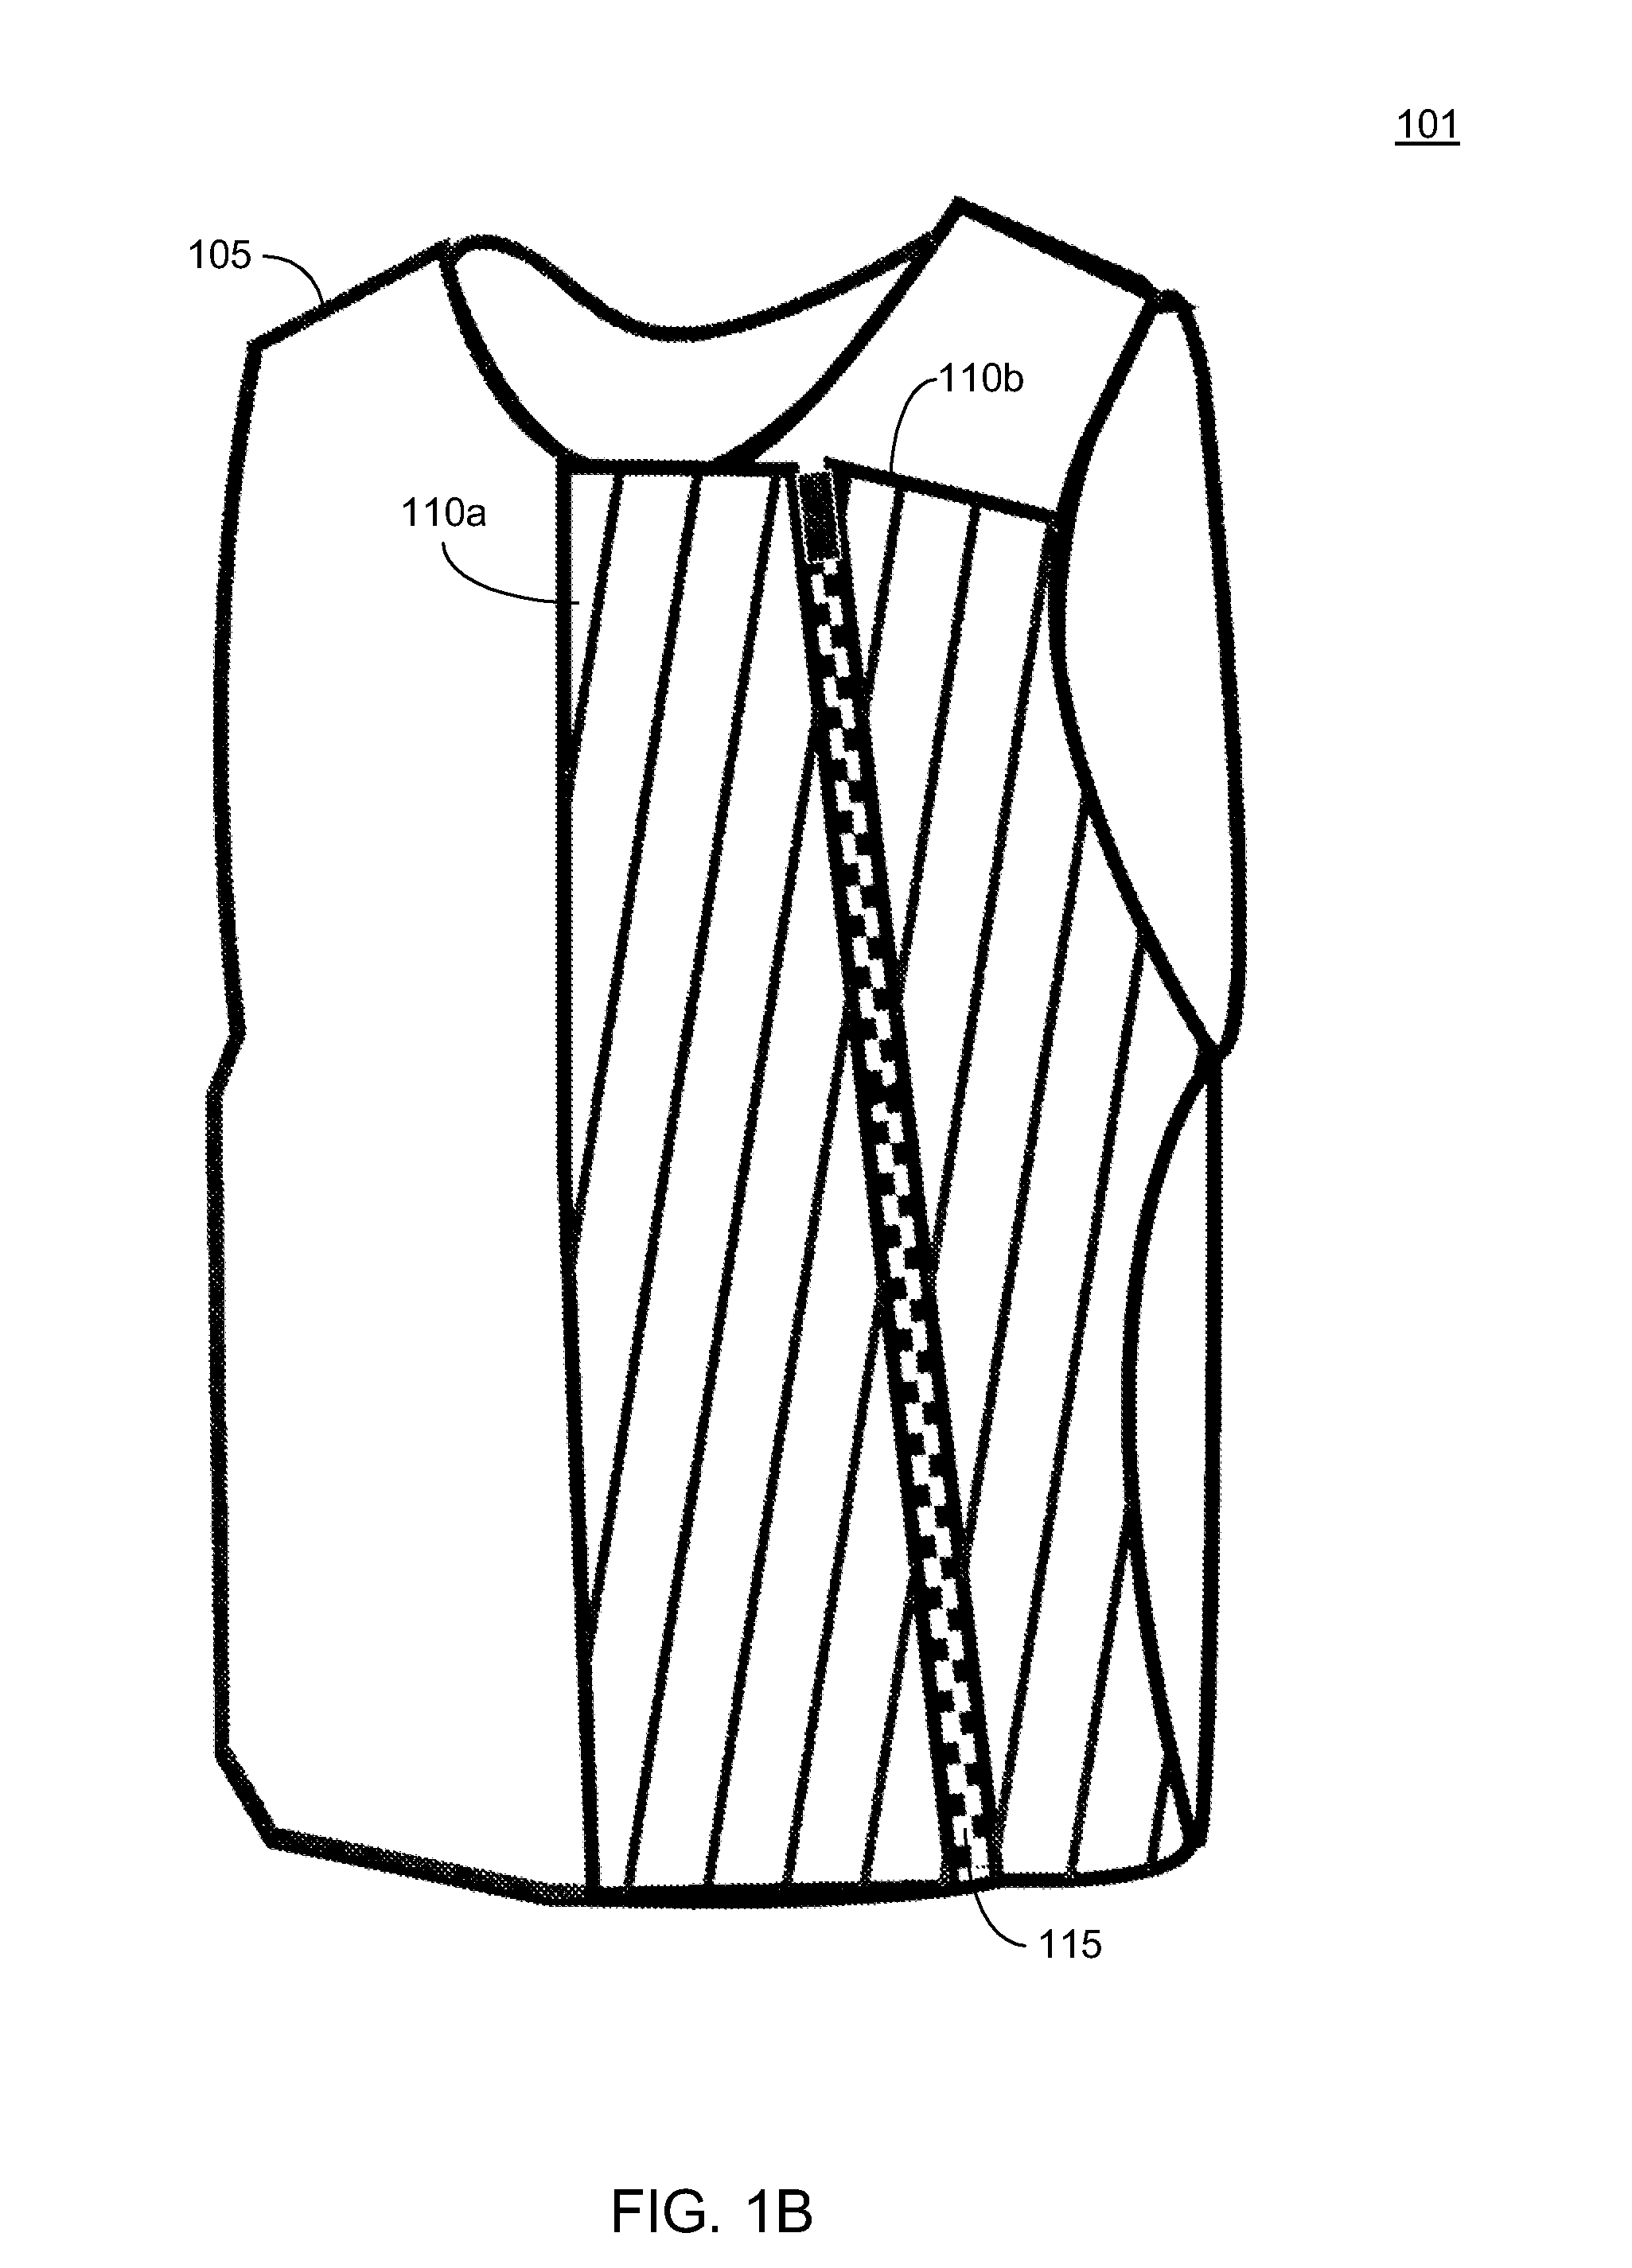 Personal flotation device with closure envelope